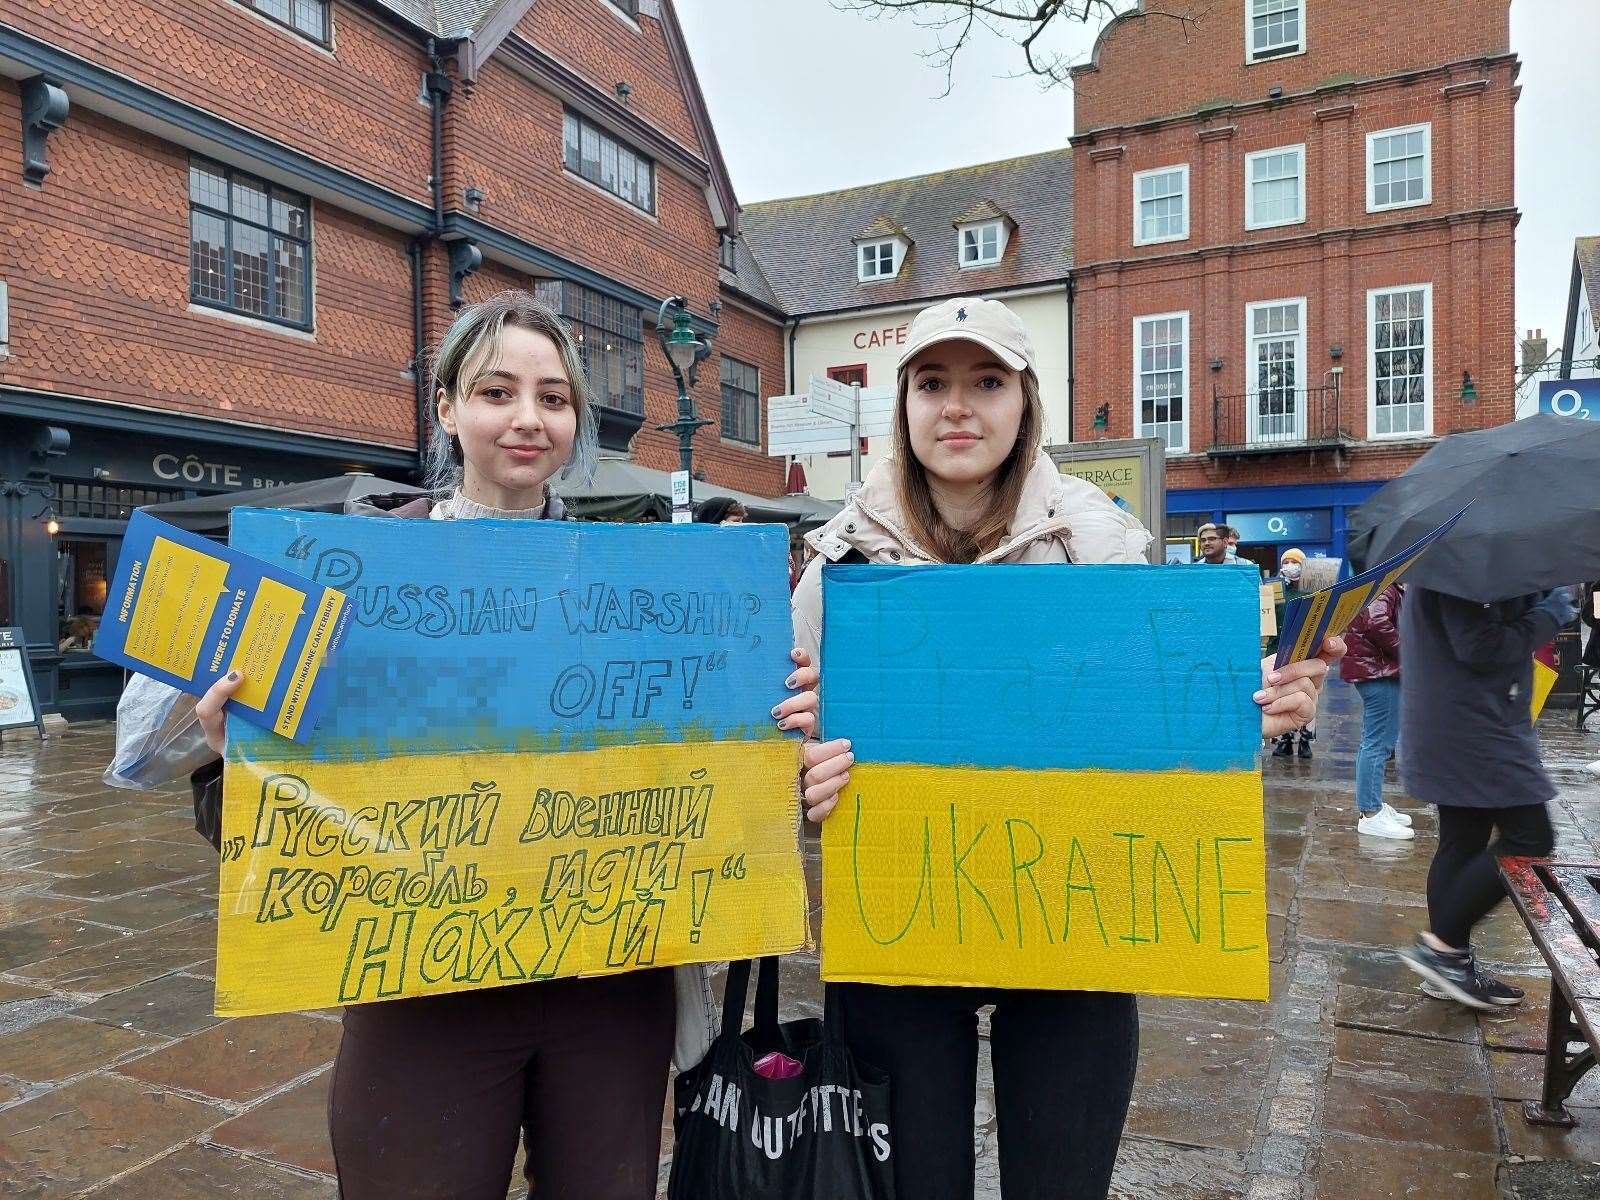 Protests have been taking place across Kent at Russia's invasion